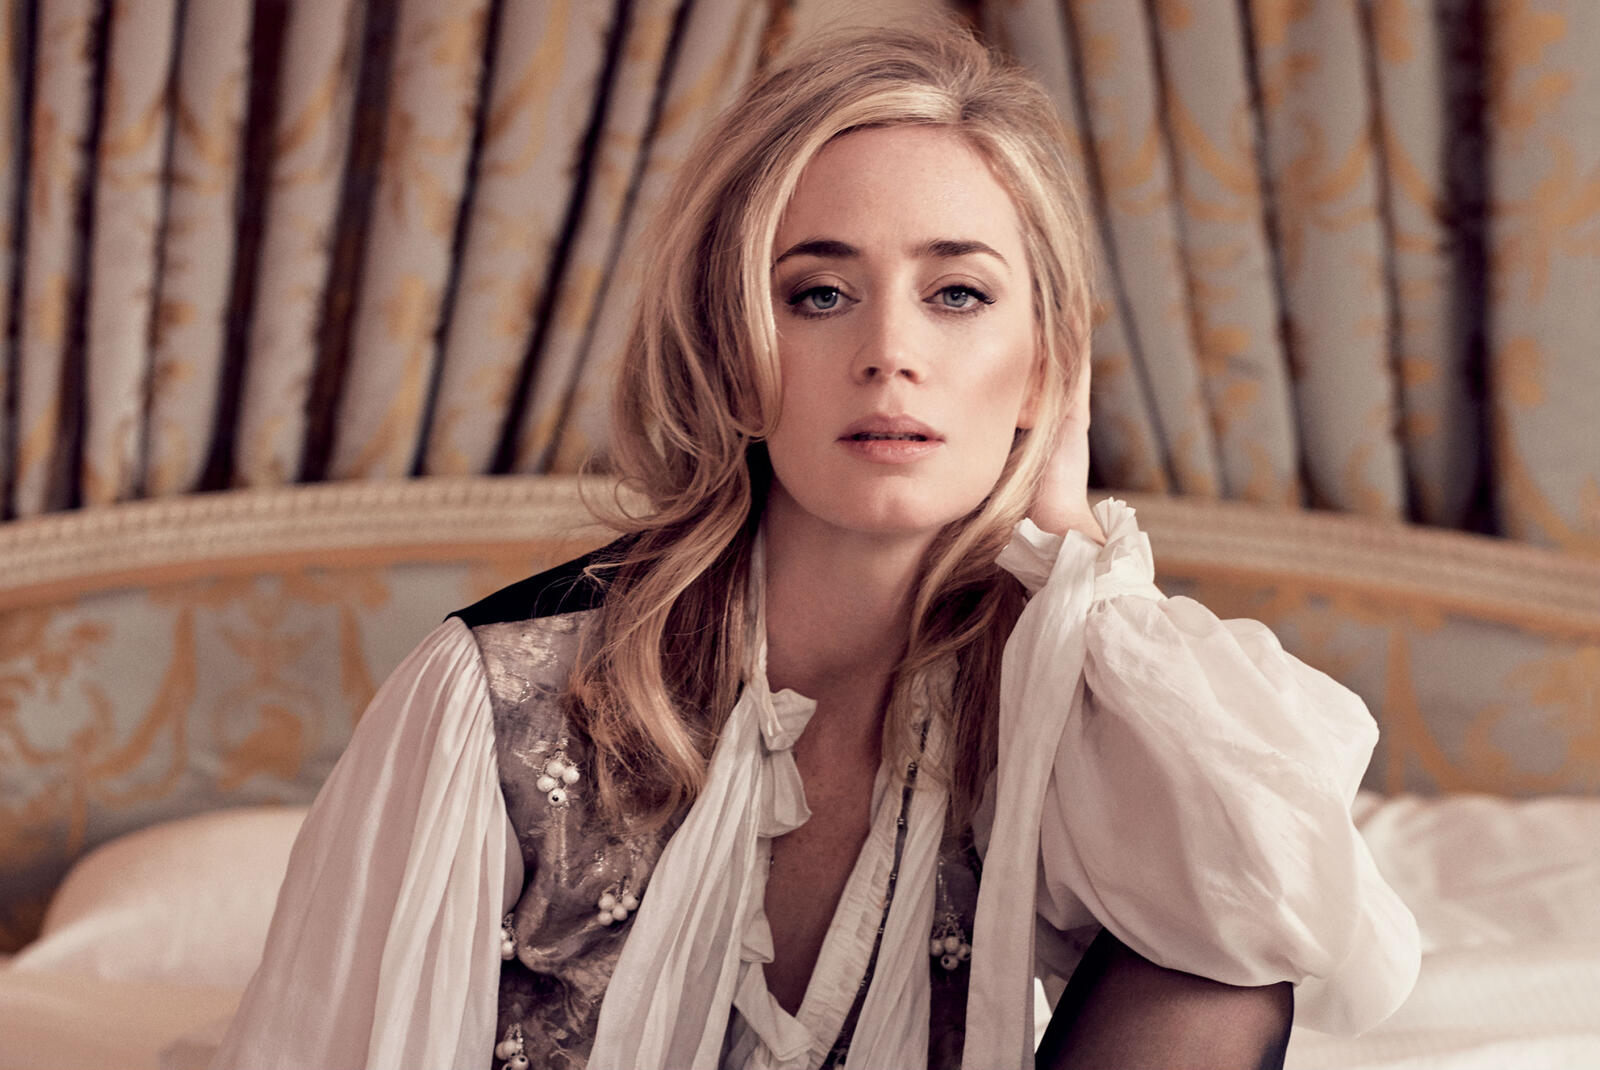 Wallpapers Emily Blunt beds photo session on the desktop